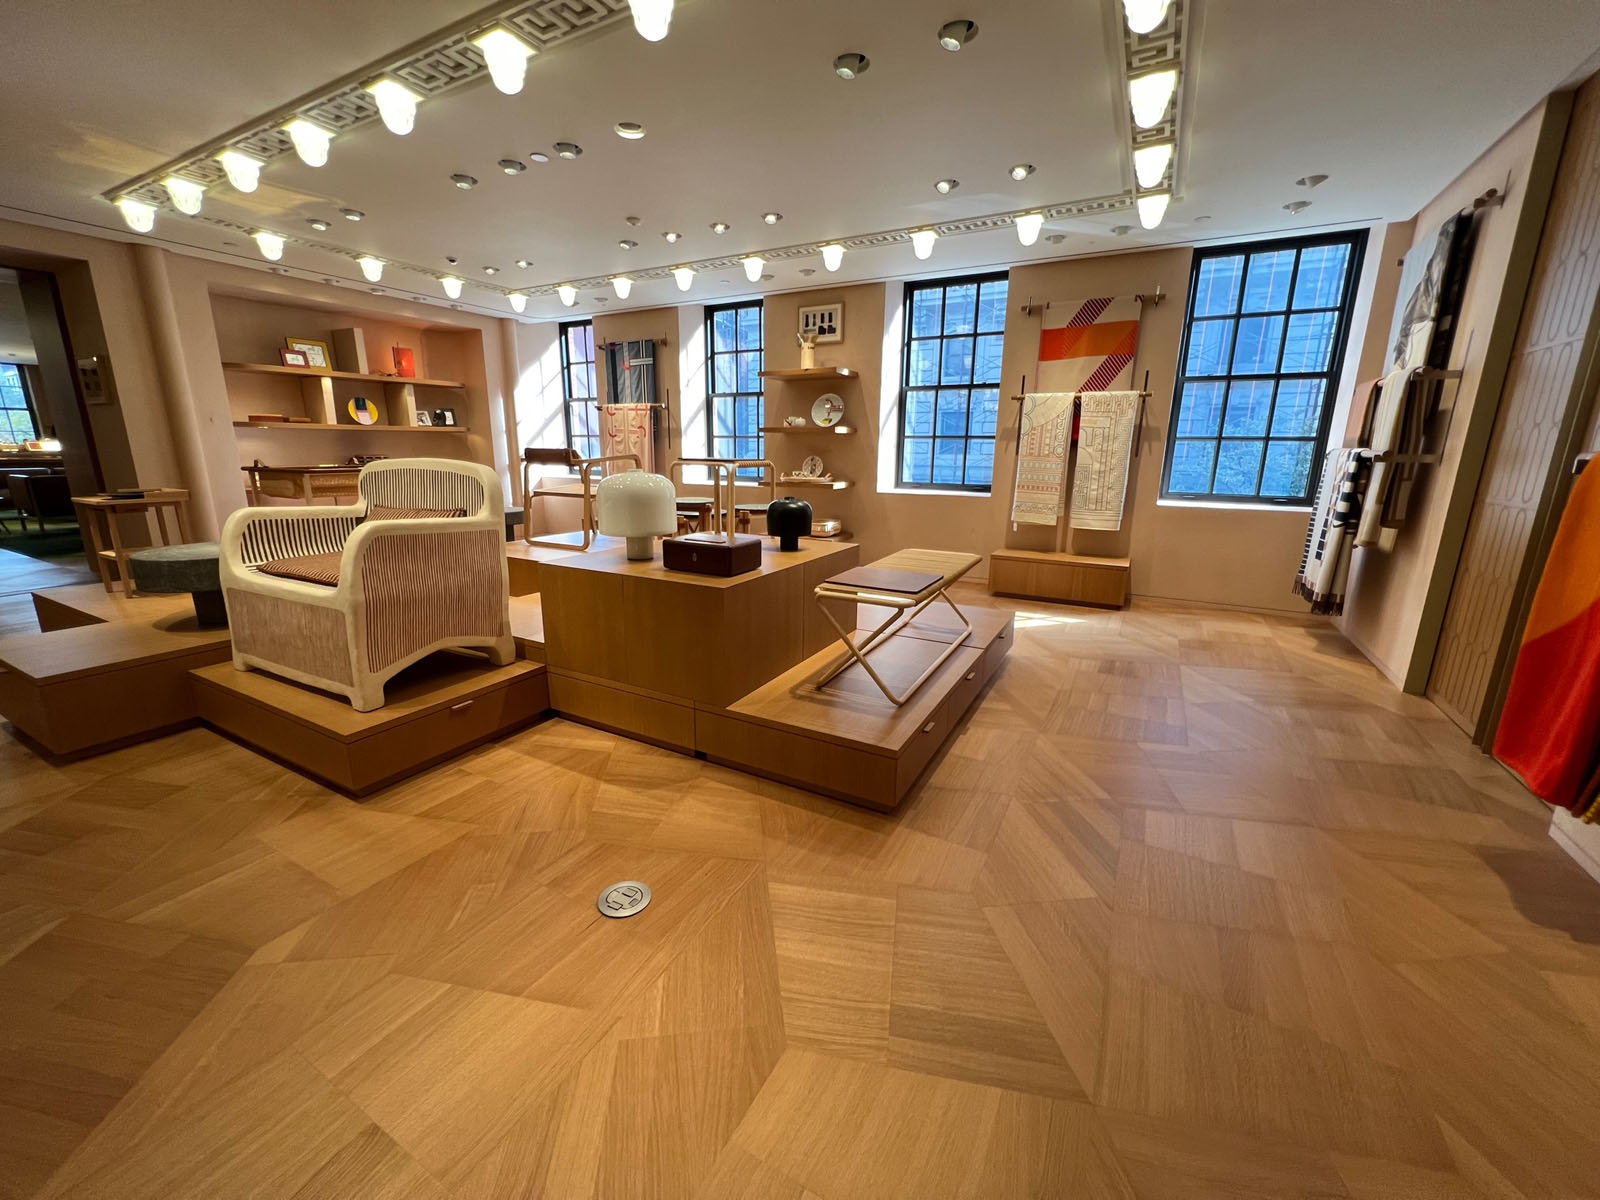 A luxury store opens on Madison Avenue in New York